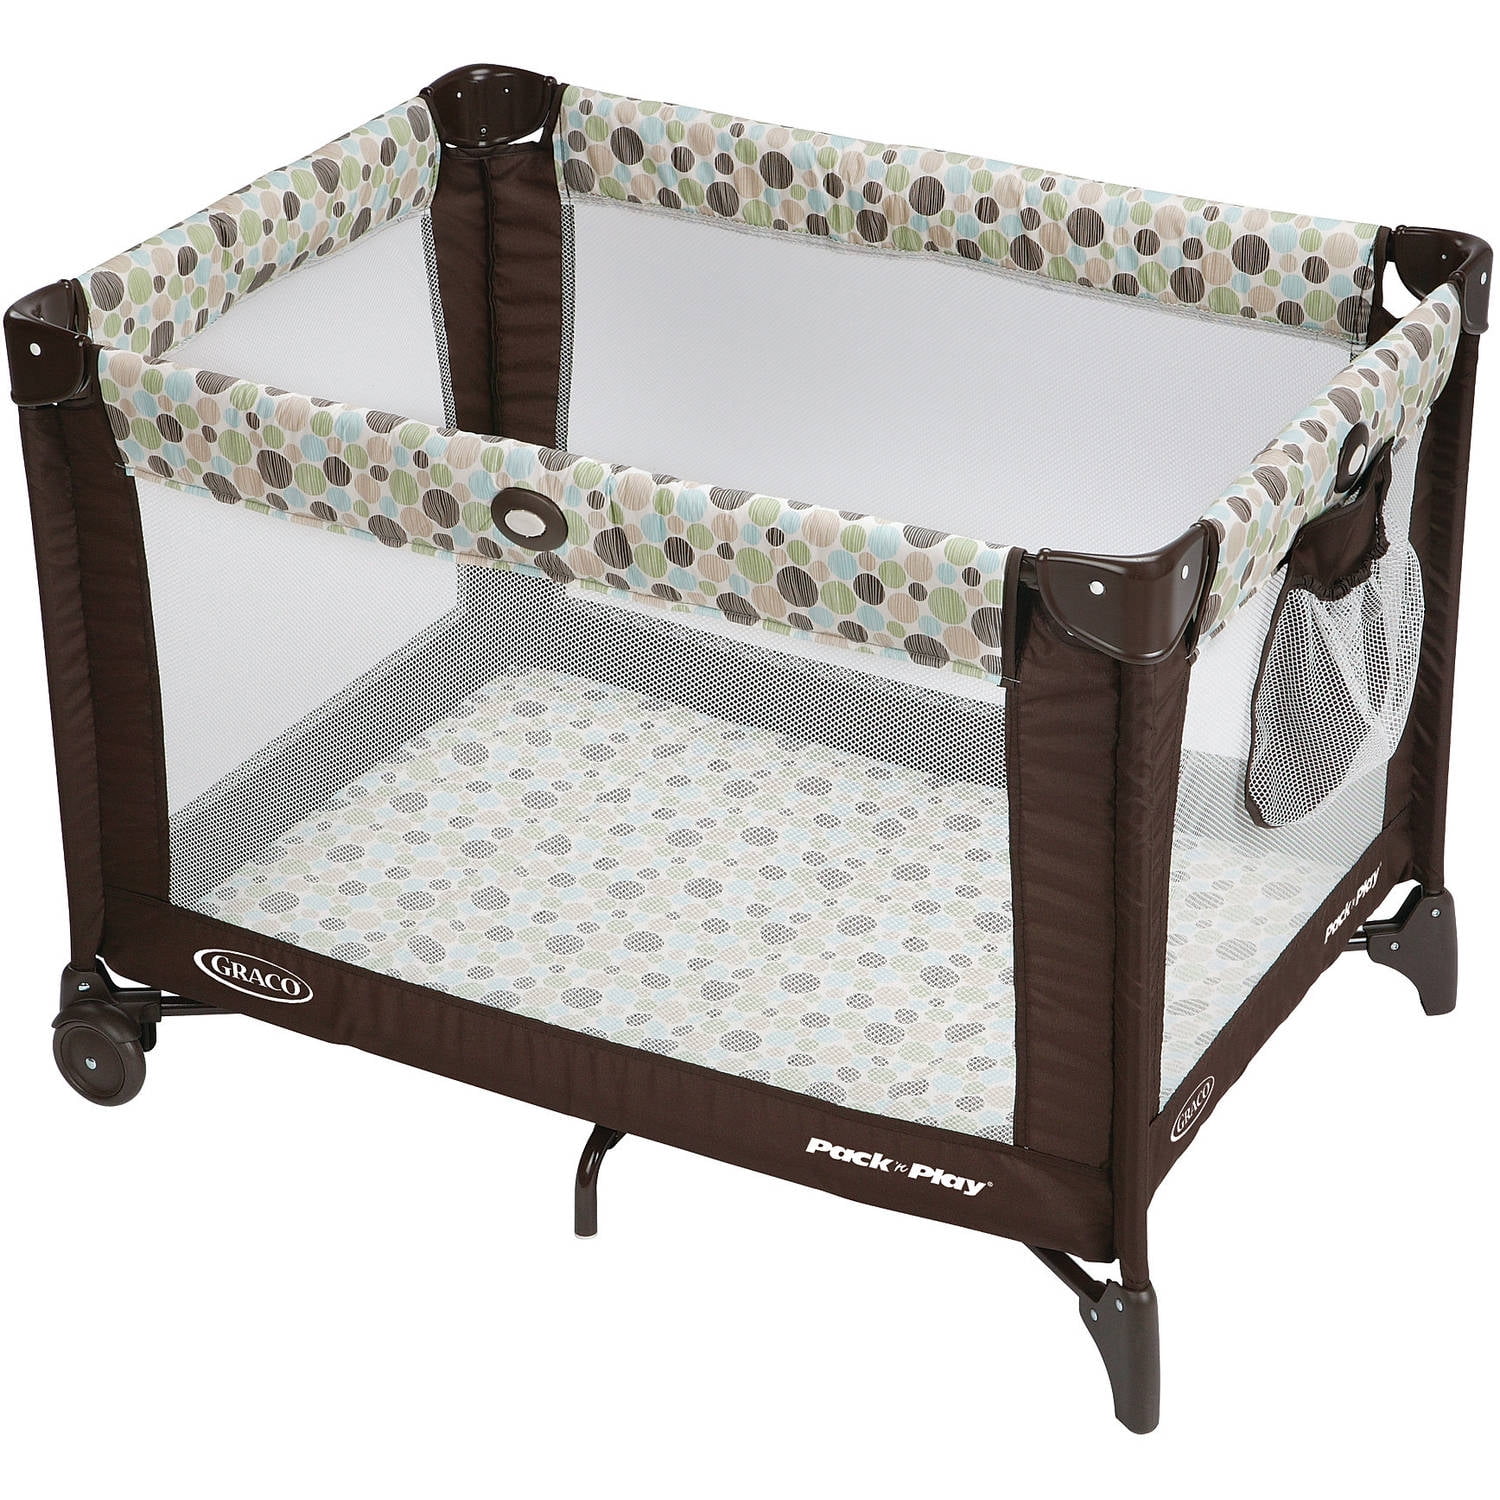 graco pack n play bassinet safe for sleeping